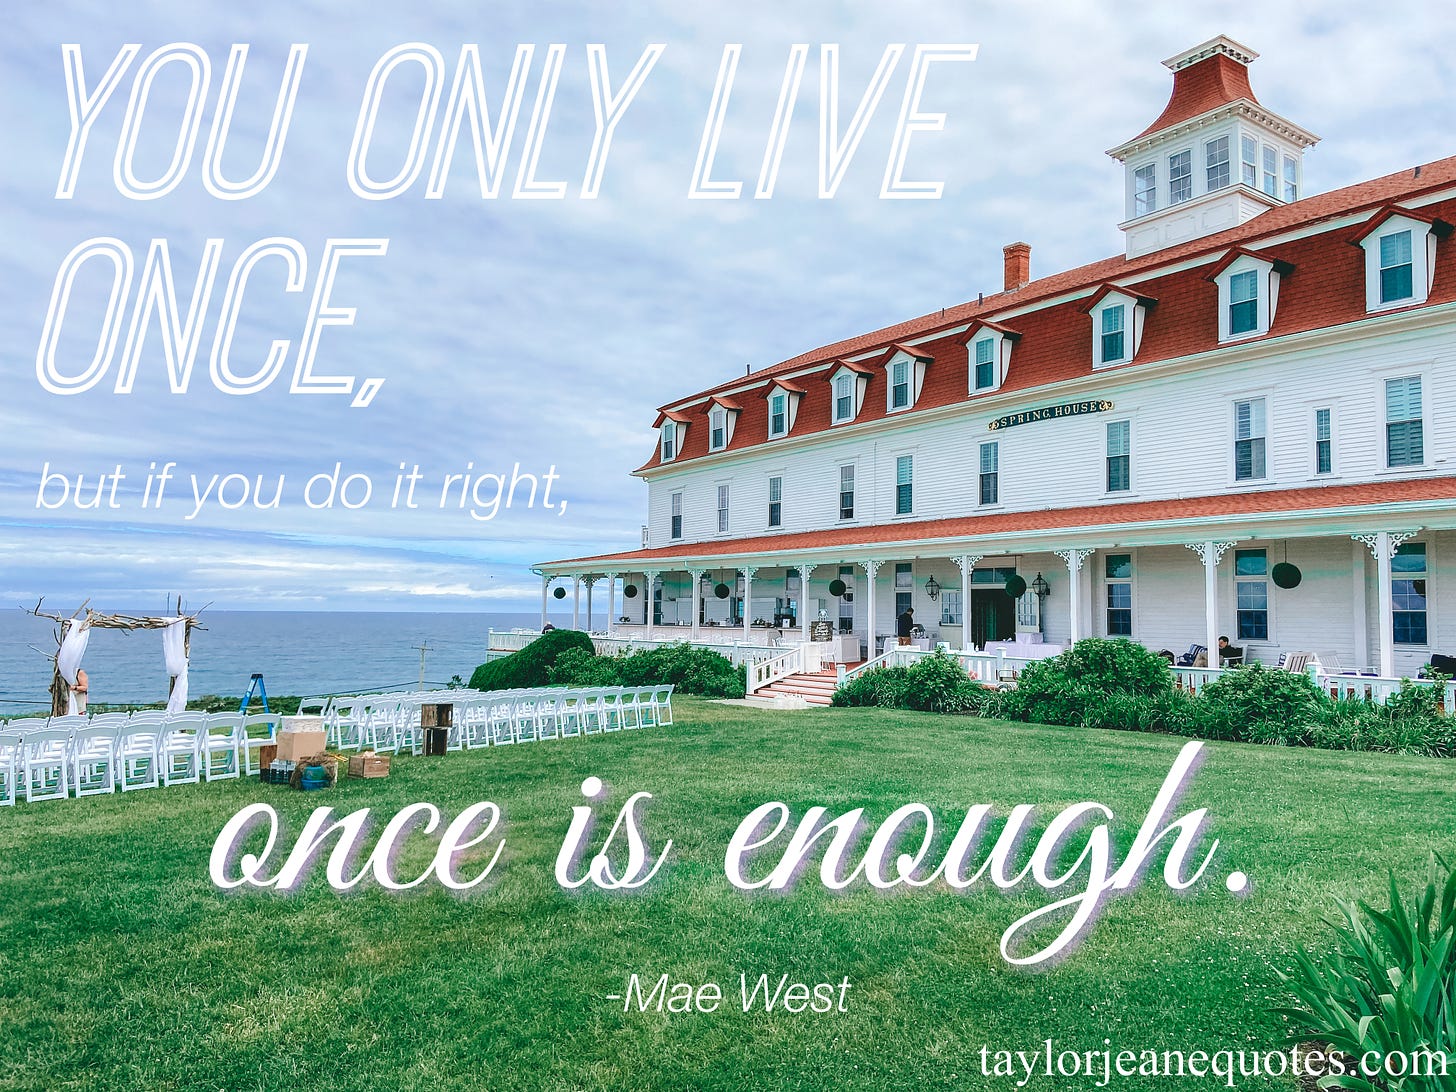 taylor jeane quotes, quote of the day, quotes, mae west, mae west quotes, motivational quotes, inspirational quotes, positive quotes, uplifting quotes, yolo, you only live once, yolo quotes, you only live once quotes, life quotes, happiness quotes